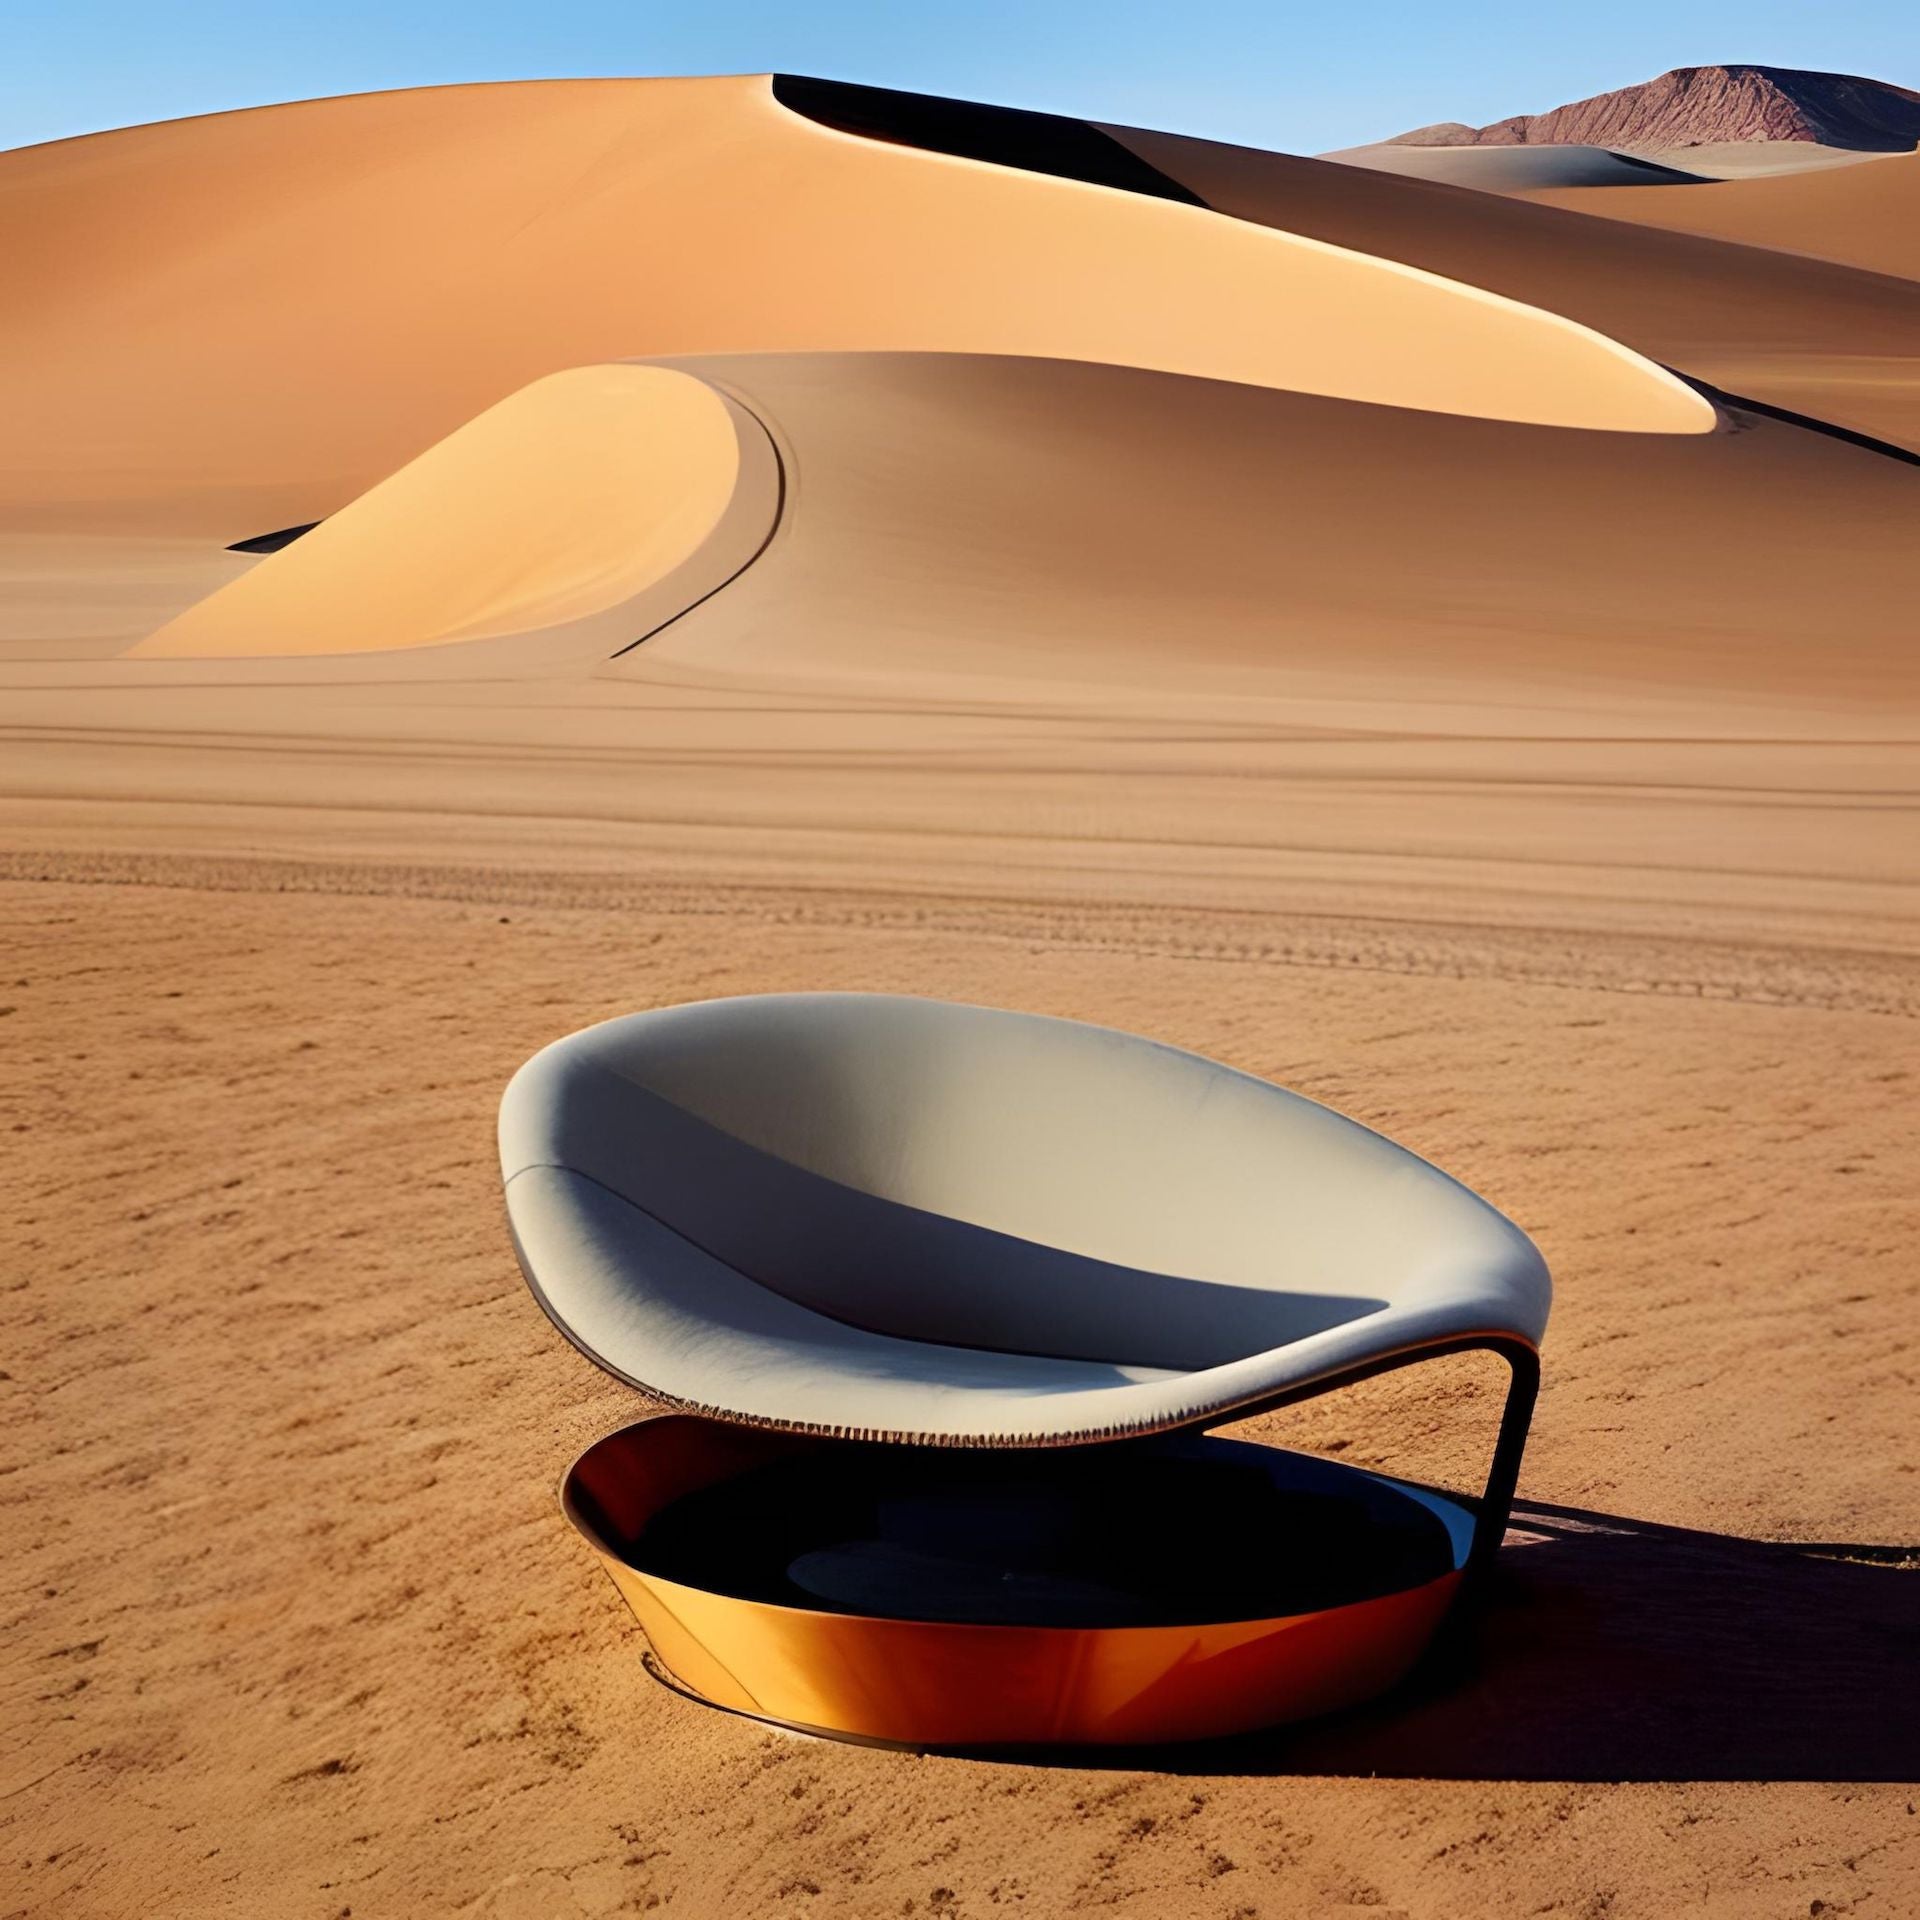 AI-generated image from prompt: "Rover Chair by Ron Arad in a desert." Via Canva